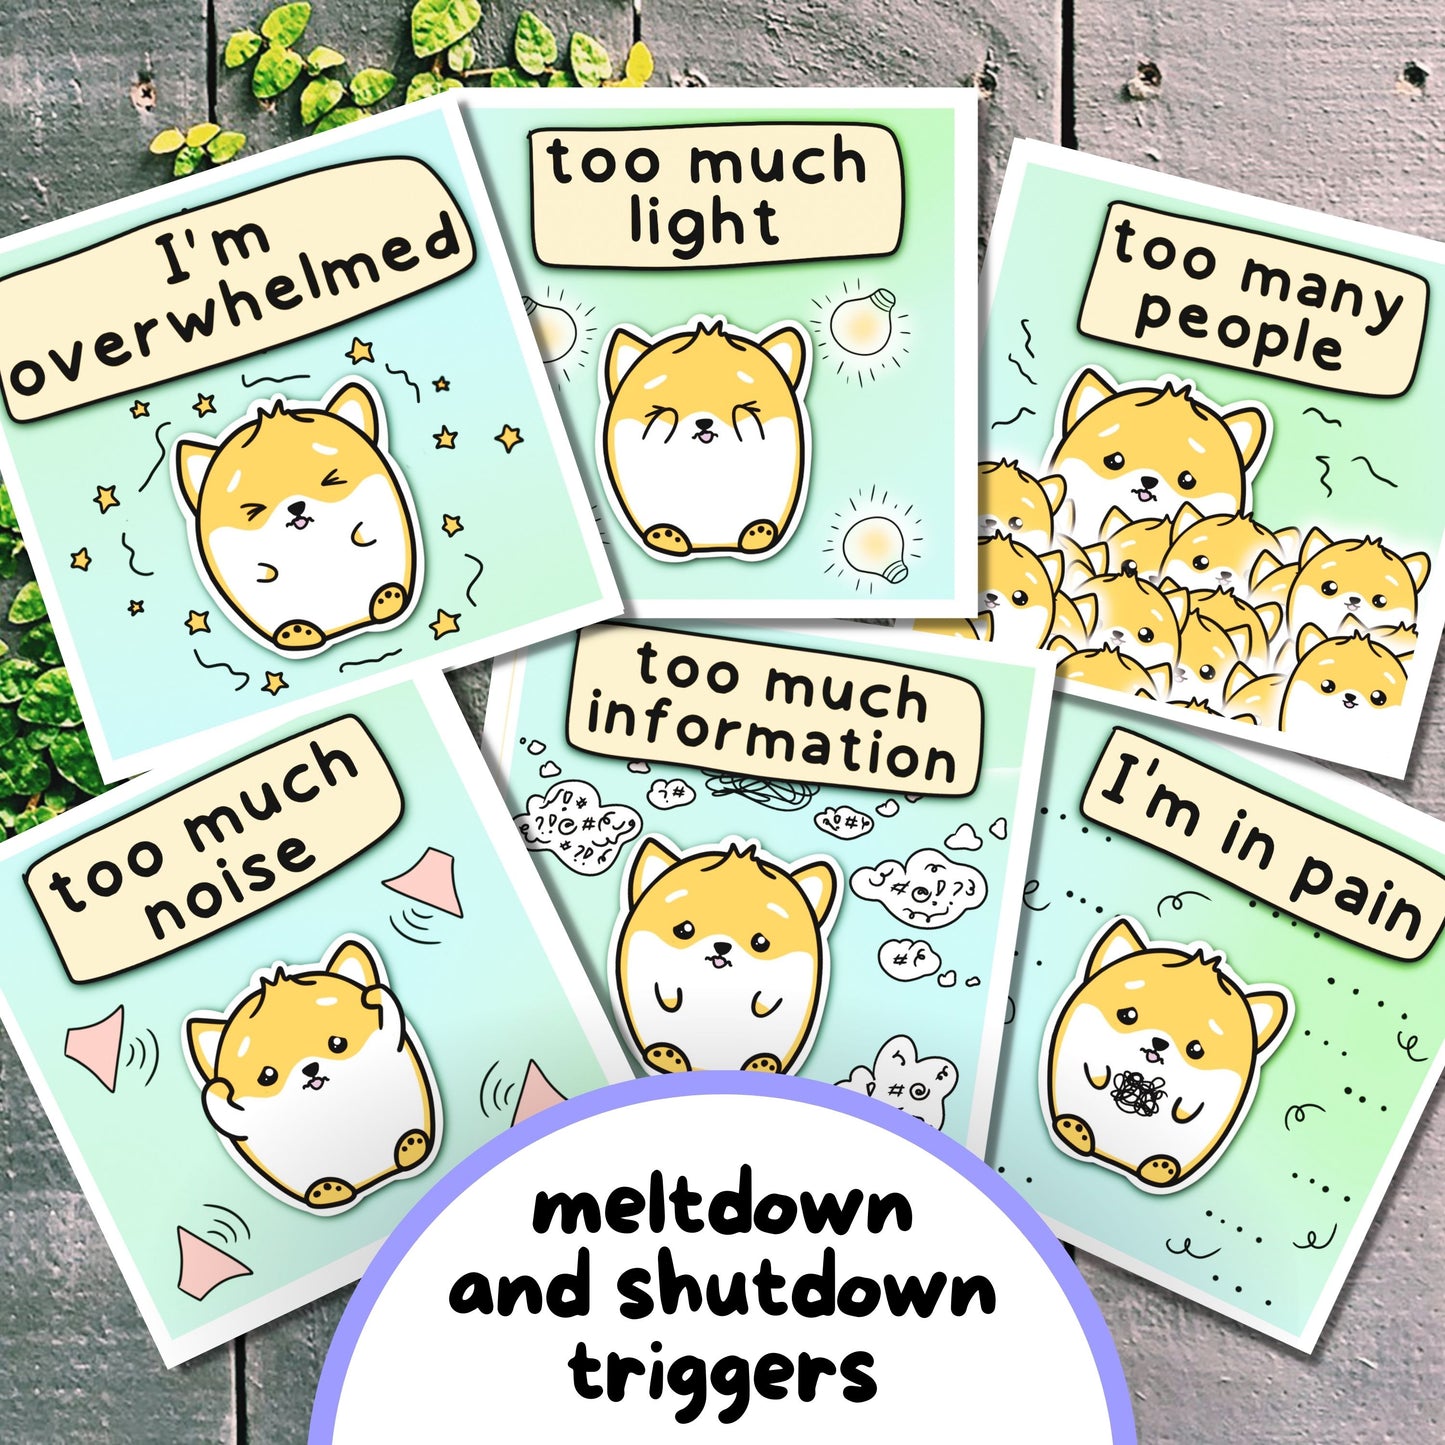 Communication Cards & Affirmation Cards (Digital) ft. Kifli, the Dog - Personal Use, by lil penguin studios, Non Verbal Communication Cards, Meltdown/ Shutdown Prevention/ Recovery Aid, Self-Regulation Tool, Autistic Burnout Help, Dog-Design Print